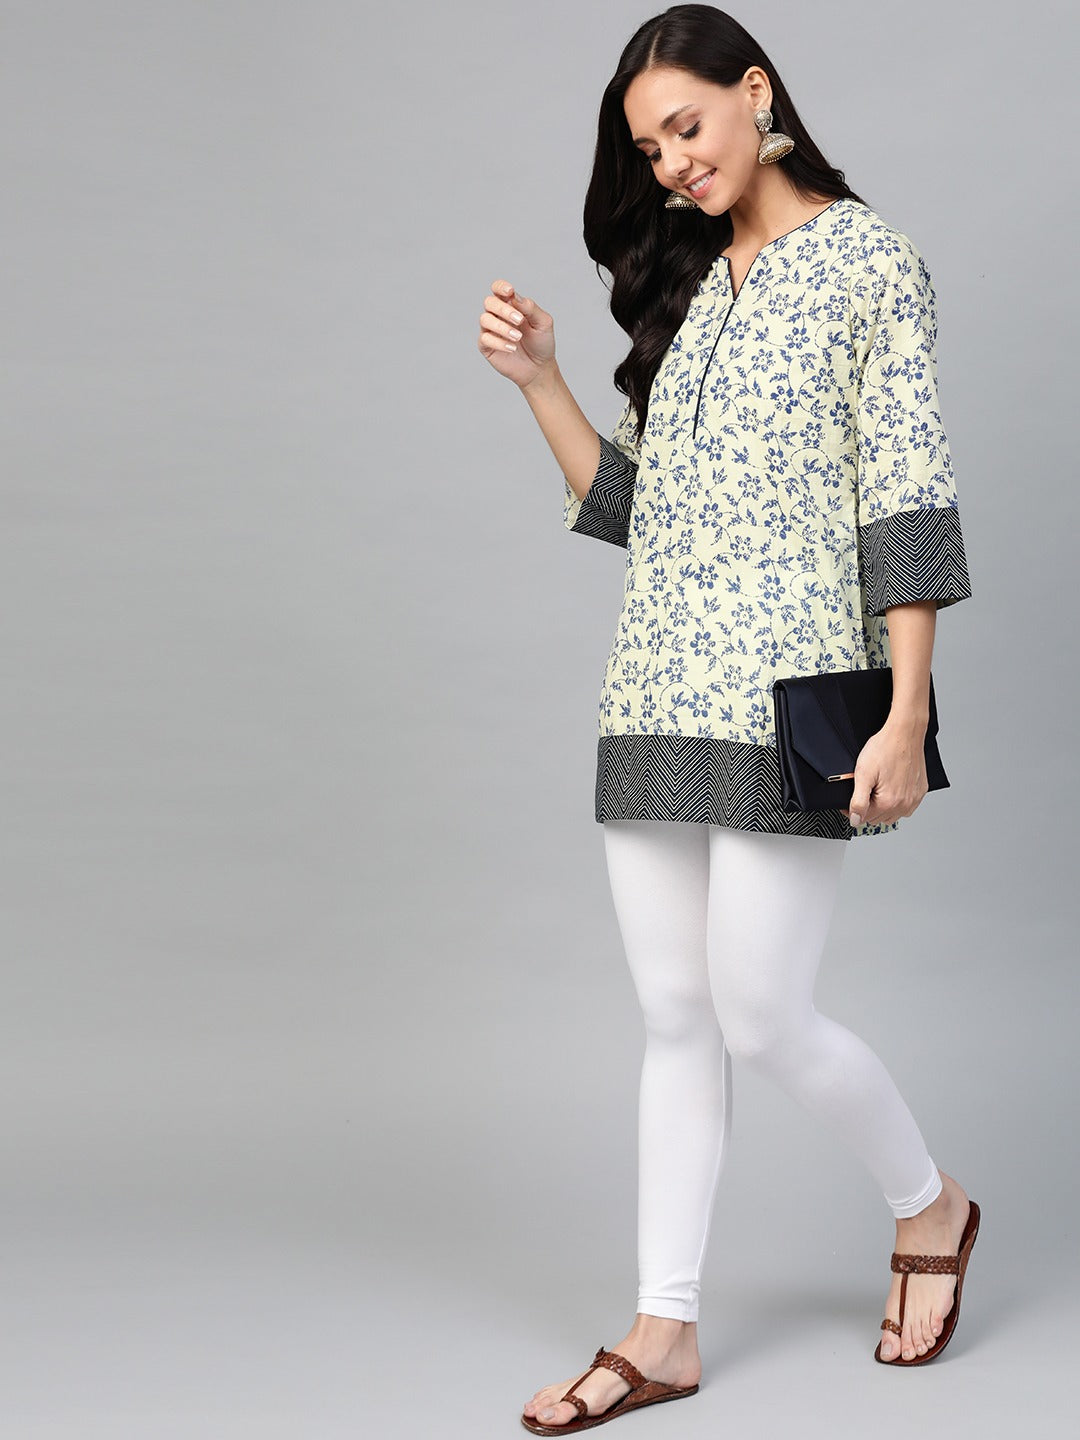 Beige & Black Floral Printed Cotton Tunic